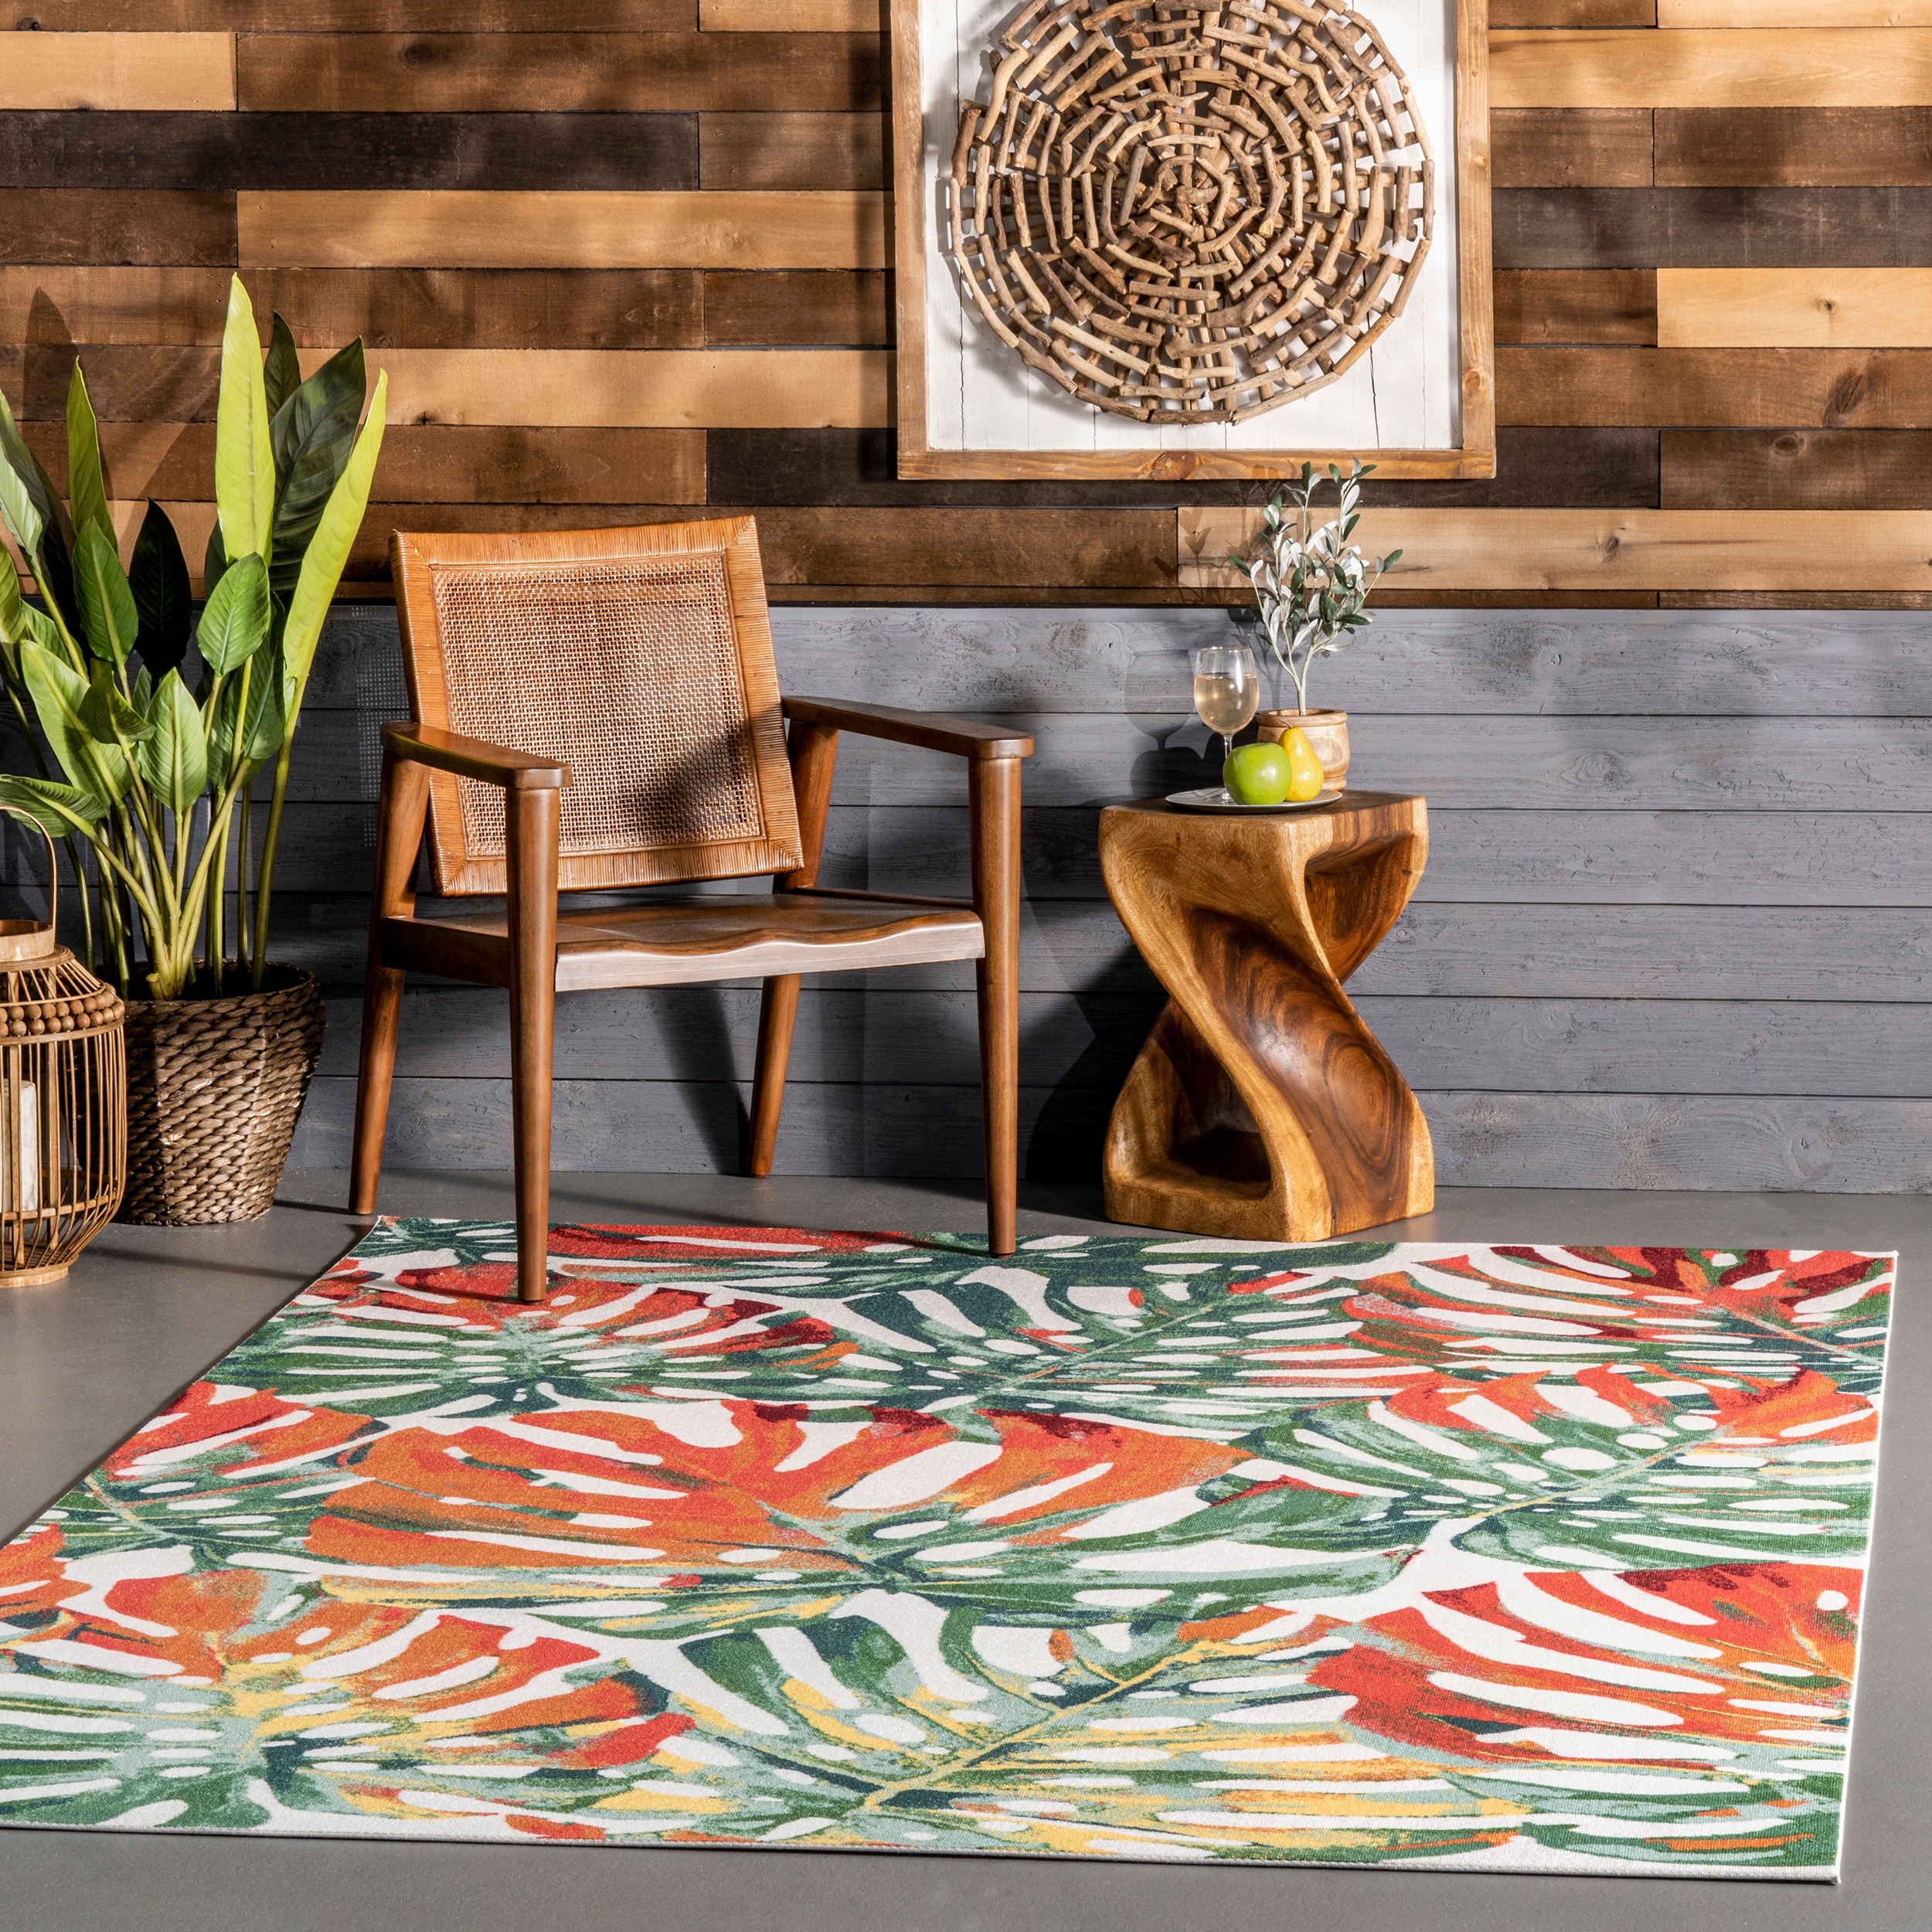 Details about   7' Square Tropical Palm Coastal Indoor Outdoor Area Rug **FREE SHIPPING** 6'6" 